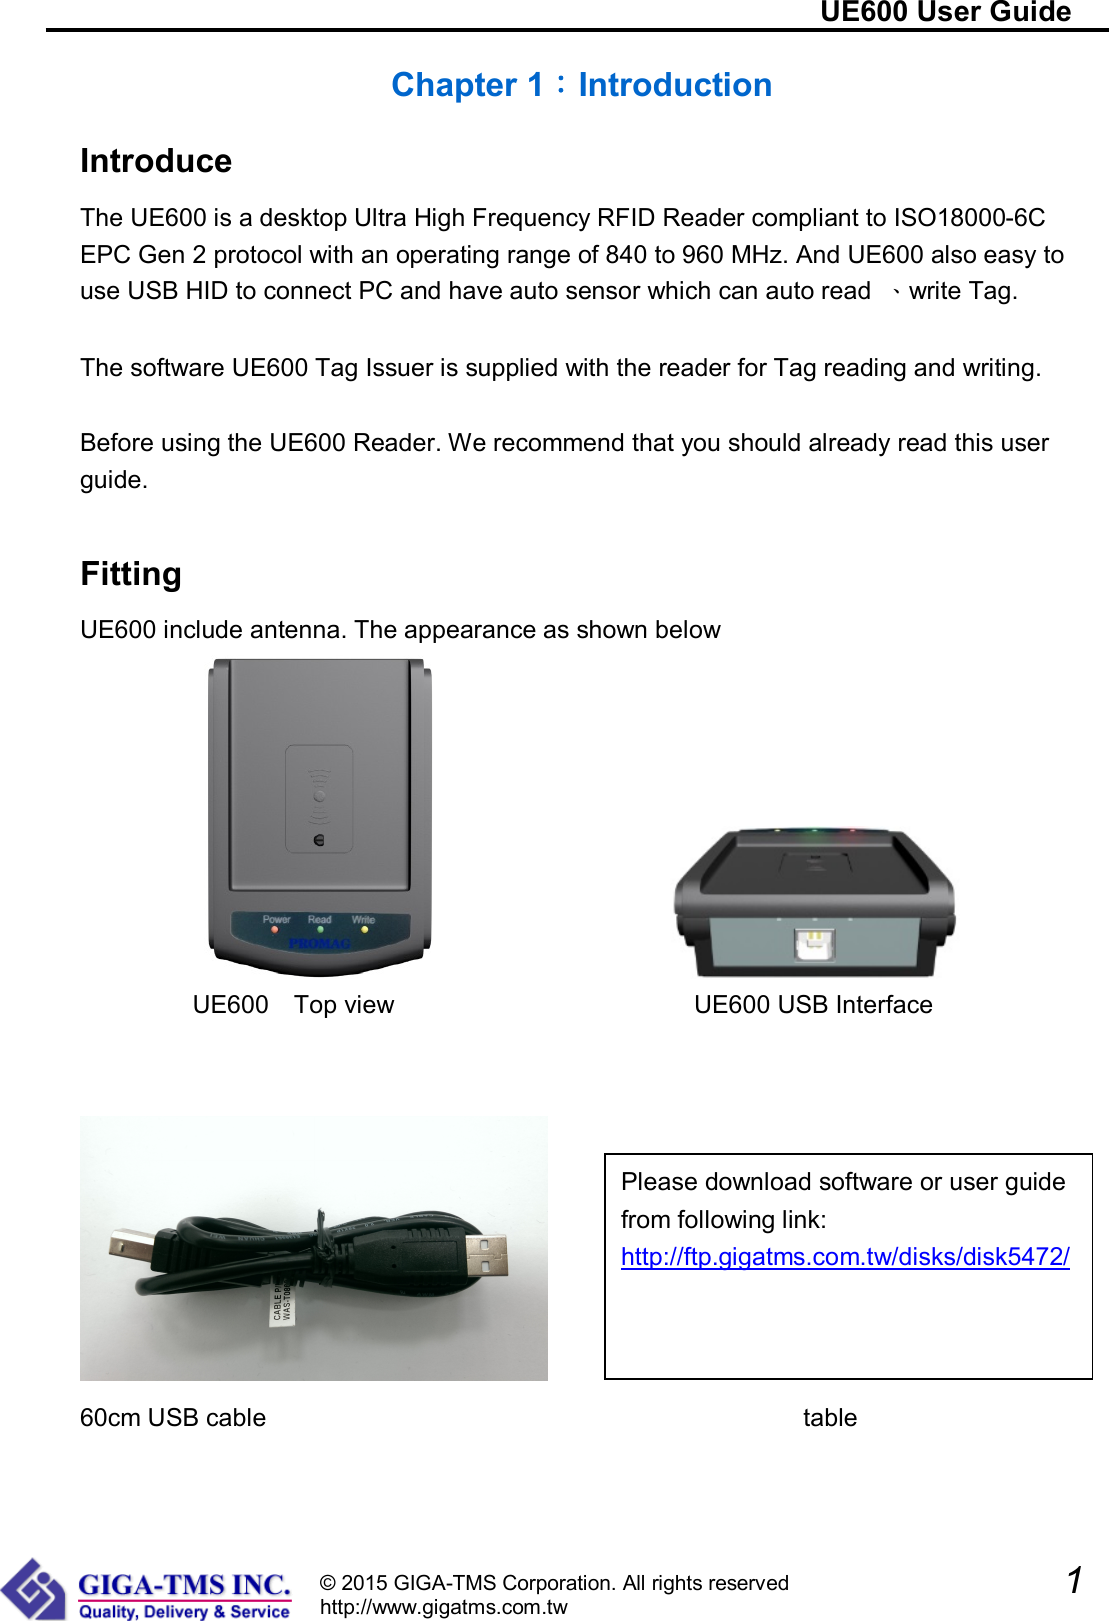                                                                        UE600 User Guide               1  © 2015 GIGA-TMS Corporation. All rights reserved http://www.gigatms.com.tw Chapter 1：Introduction Introduce The UE600 is a desktop Ultra High Frequency RFID Reader compliant to ISO18000-6C EPC Gen 2 protocol with an operating range of 840 to 960 MHz. And UE600 also easy to use USB HID to connect PC and have auto sensor which can auto read  、write Tag.  The software UE600 Tag Issuer is supplied with the reader for Tag reading and writing.    Before using the UE600 Reader. We recommend that you should already read this user guide.  Fitting UE600 include antenna. The appearance as shown below                      UE600    Top view                                                UE600 USB Interface         60cm USB cable                                           table Please download software or user guide from following link: http://ftp.gigatms.com.tw/disks/disk5472/ 